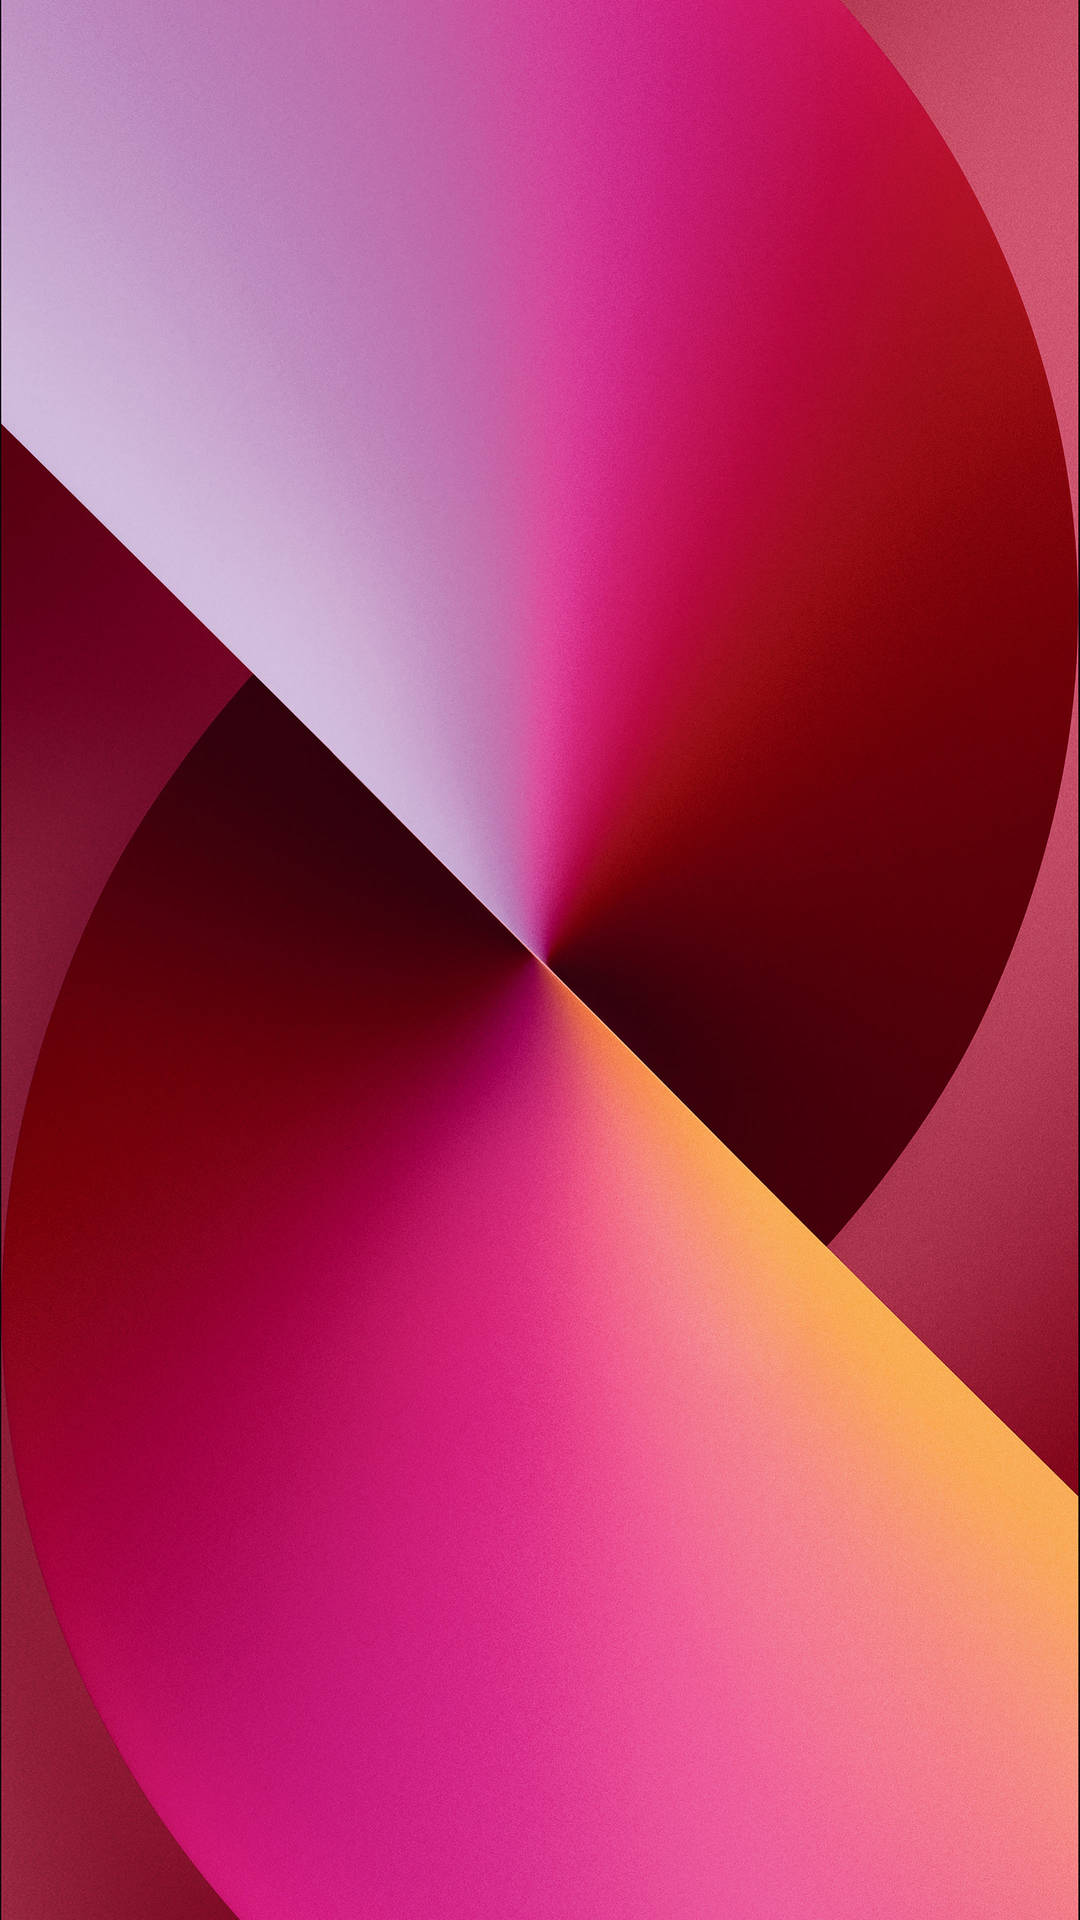 iOS 15 wallpaper: get the new design 3 months early - TapSmart